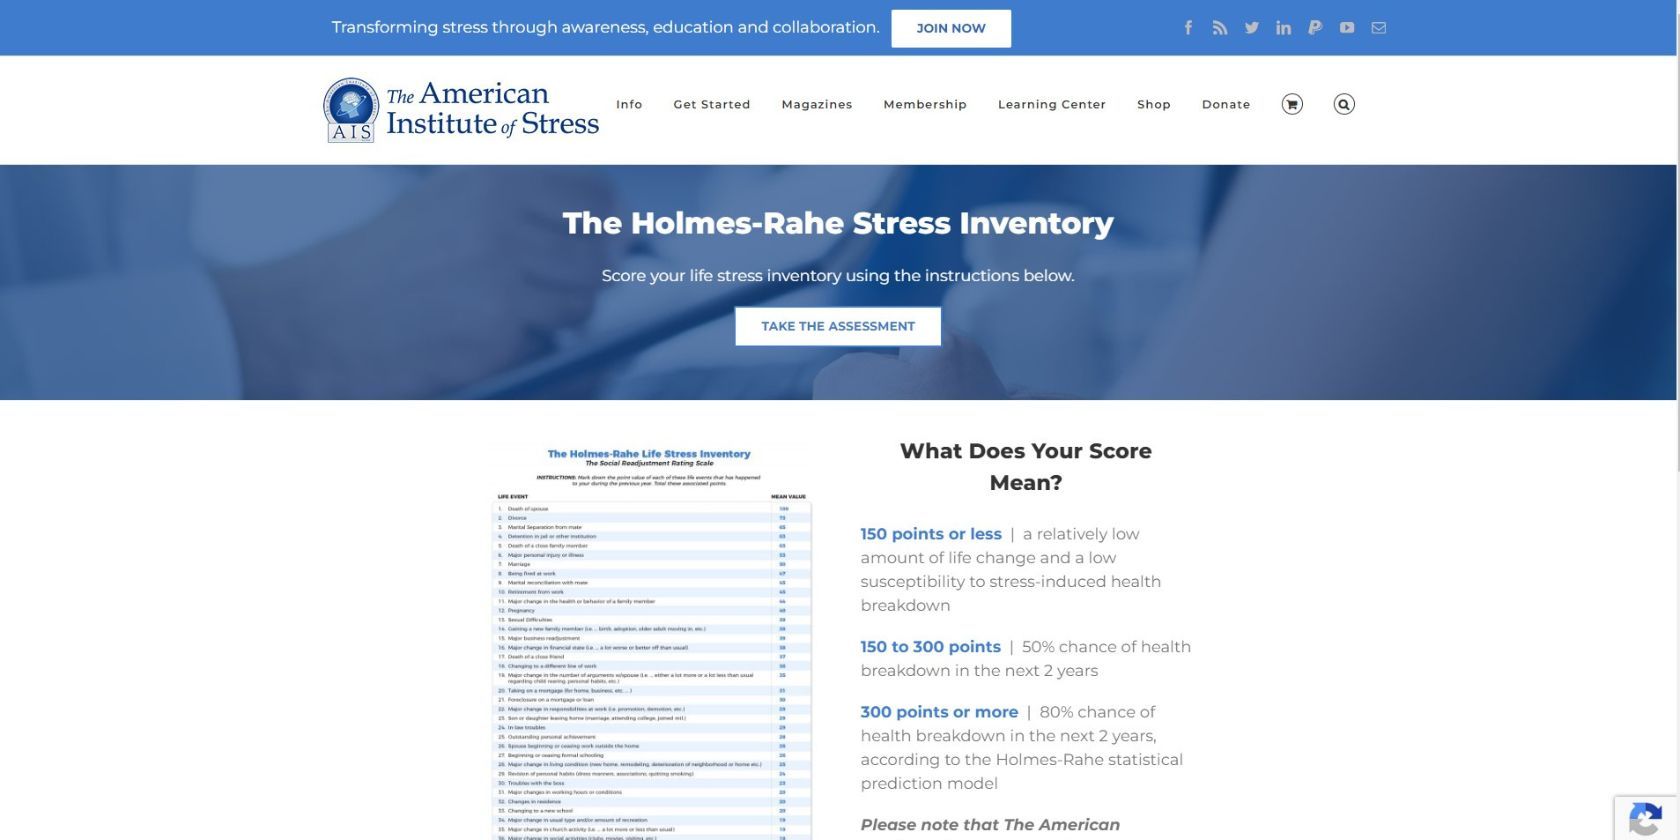 The Holmes-Rahe Life Stress Inventory or Social Readjustment Rating Scale (SRRS) on the American Institute of Stress